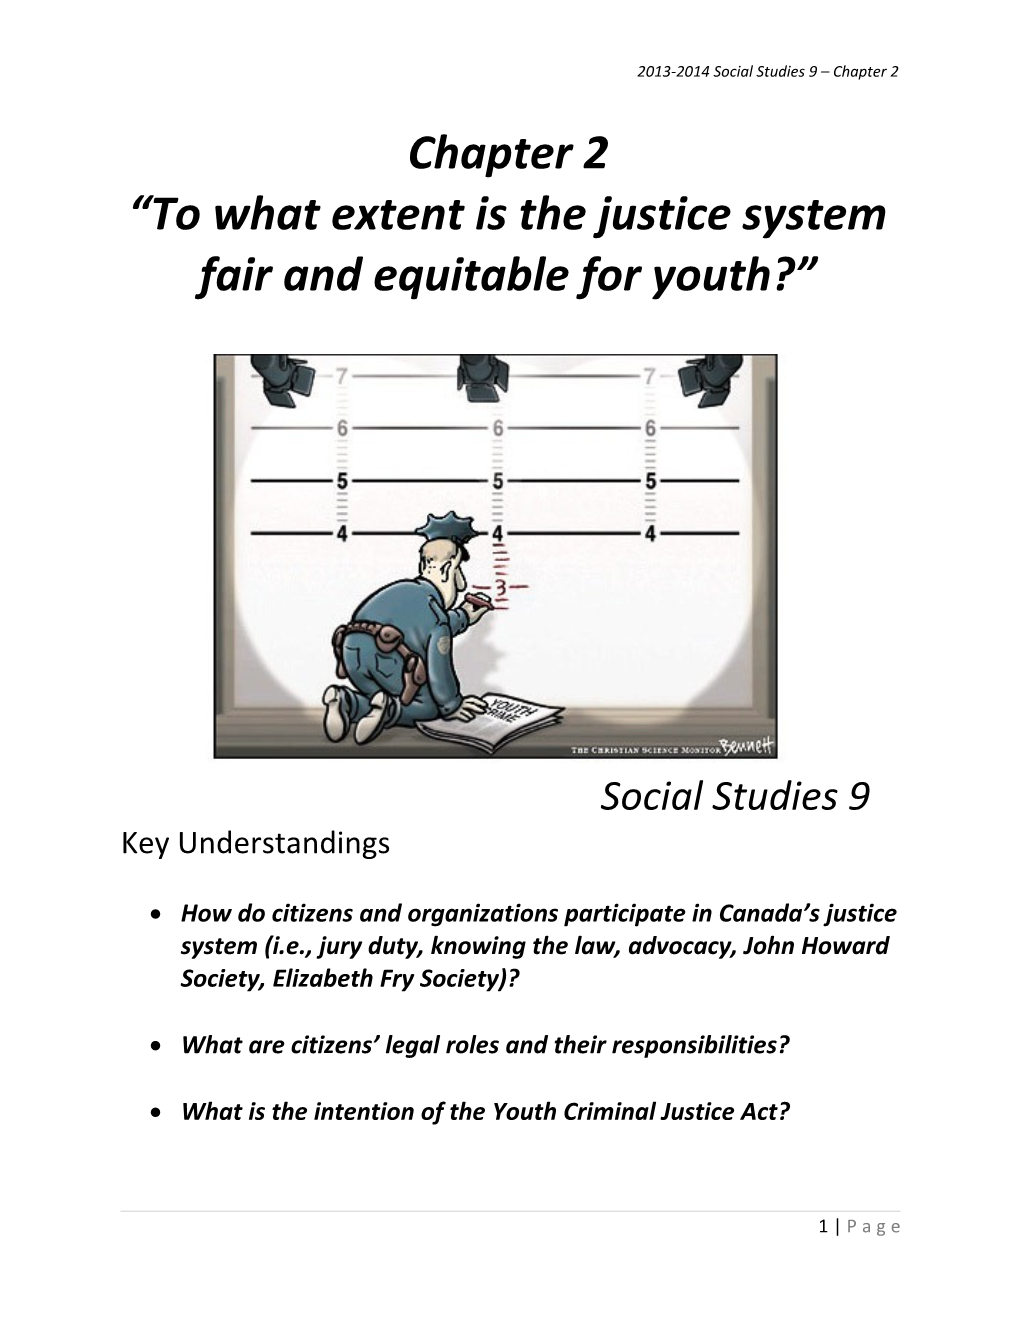 Grade 9 Social Studies Chapter 2 to What Extent Is the Justice System Fair and Equitable